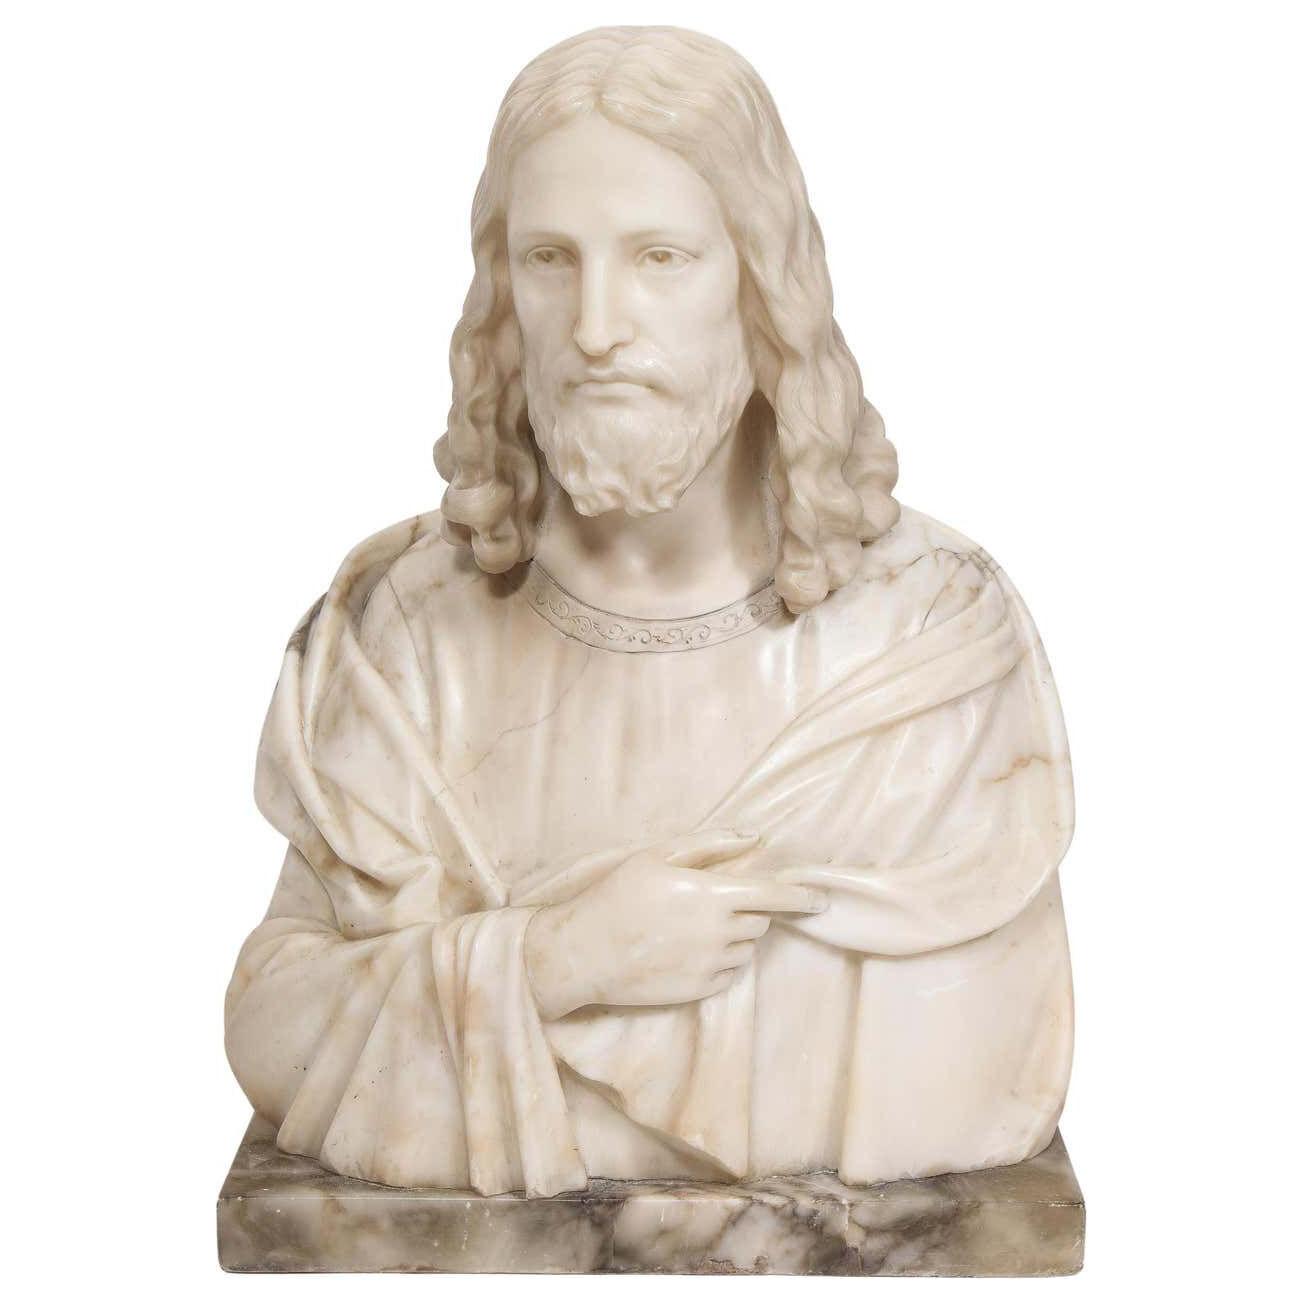 Magnificent 19th Century Italian Alabaster Bust Sculpture of Holy Jesus Christ 